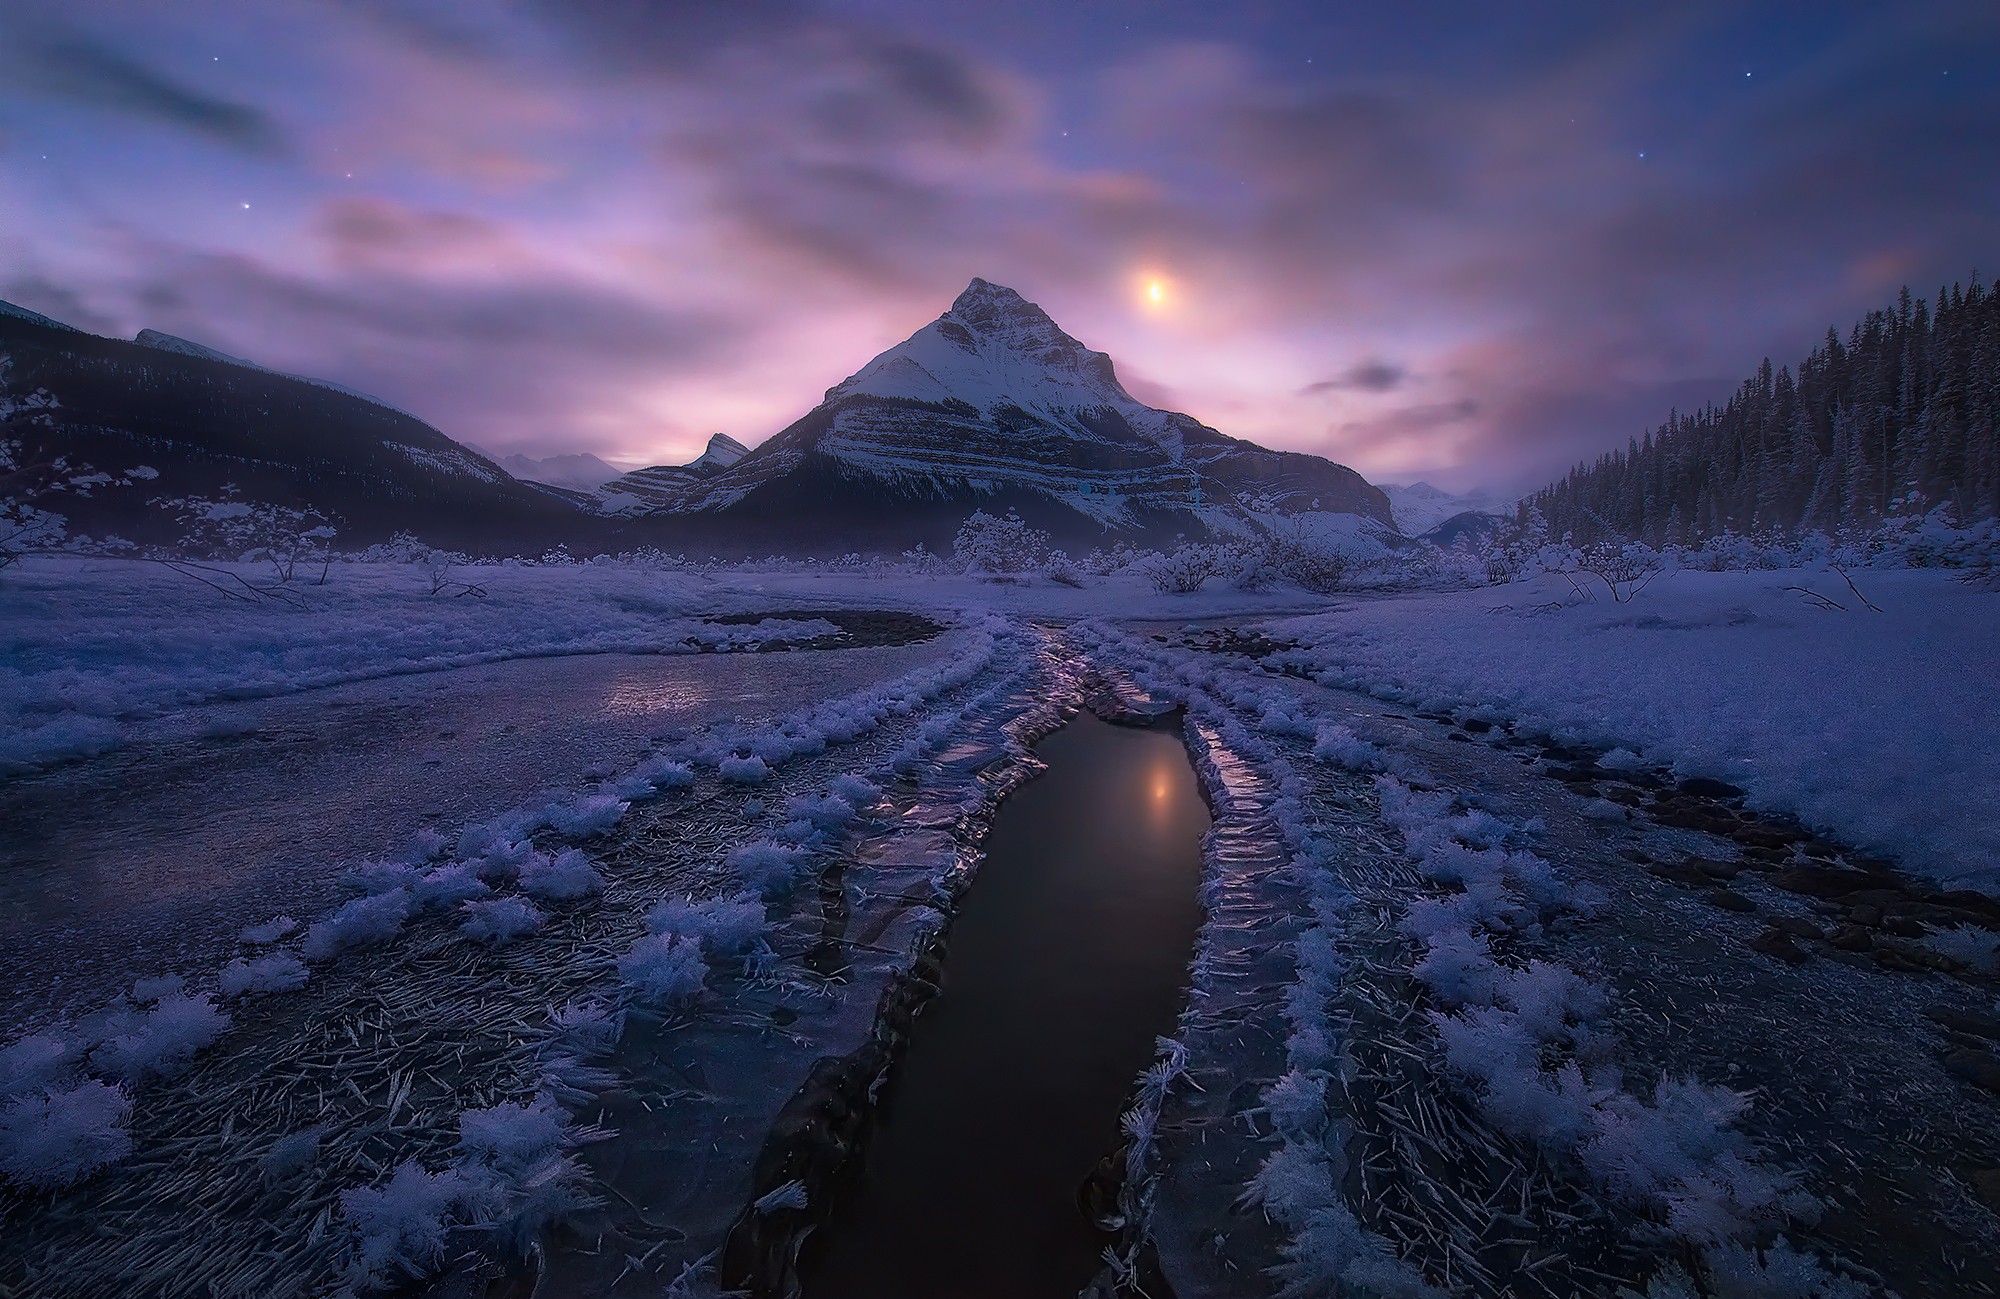 General 2000x1299 Alberta landscape Canada nature ice winter cold outdoors snowy peak low light